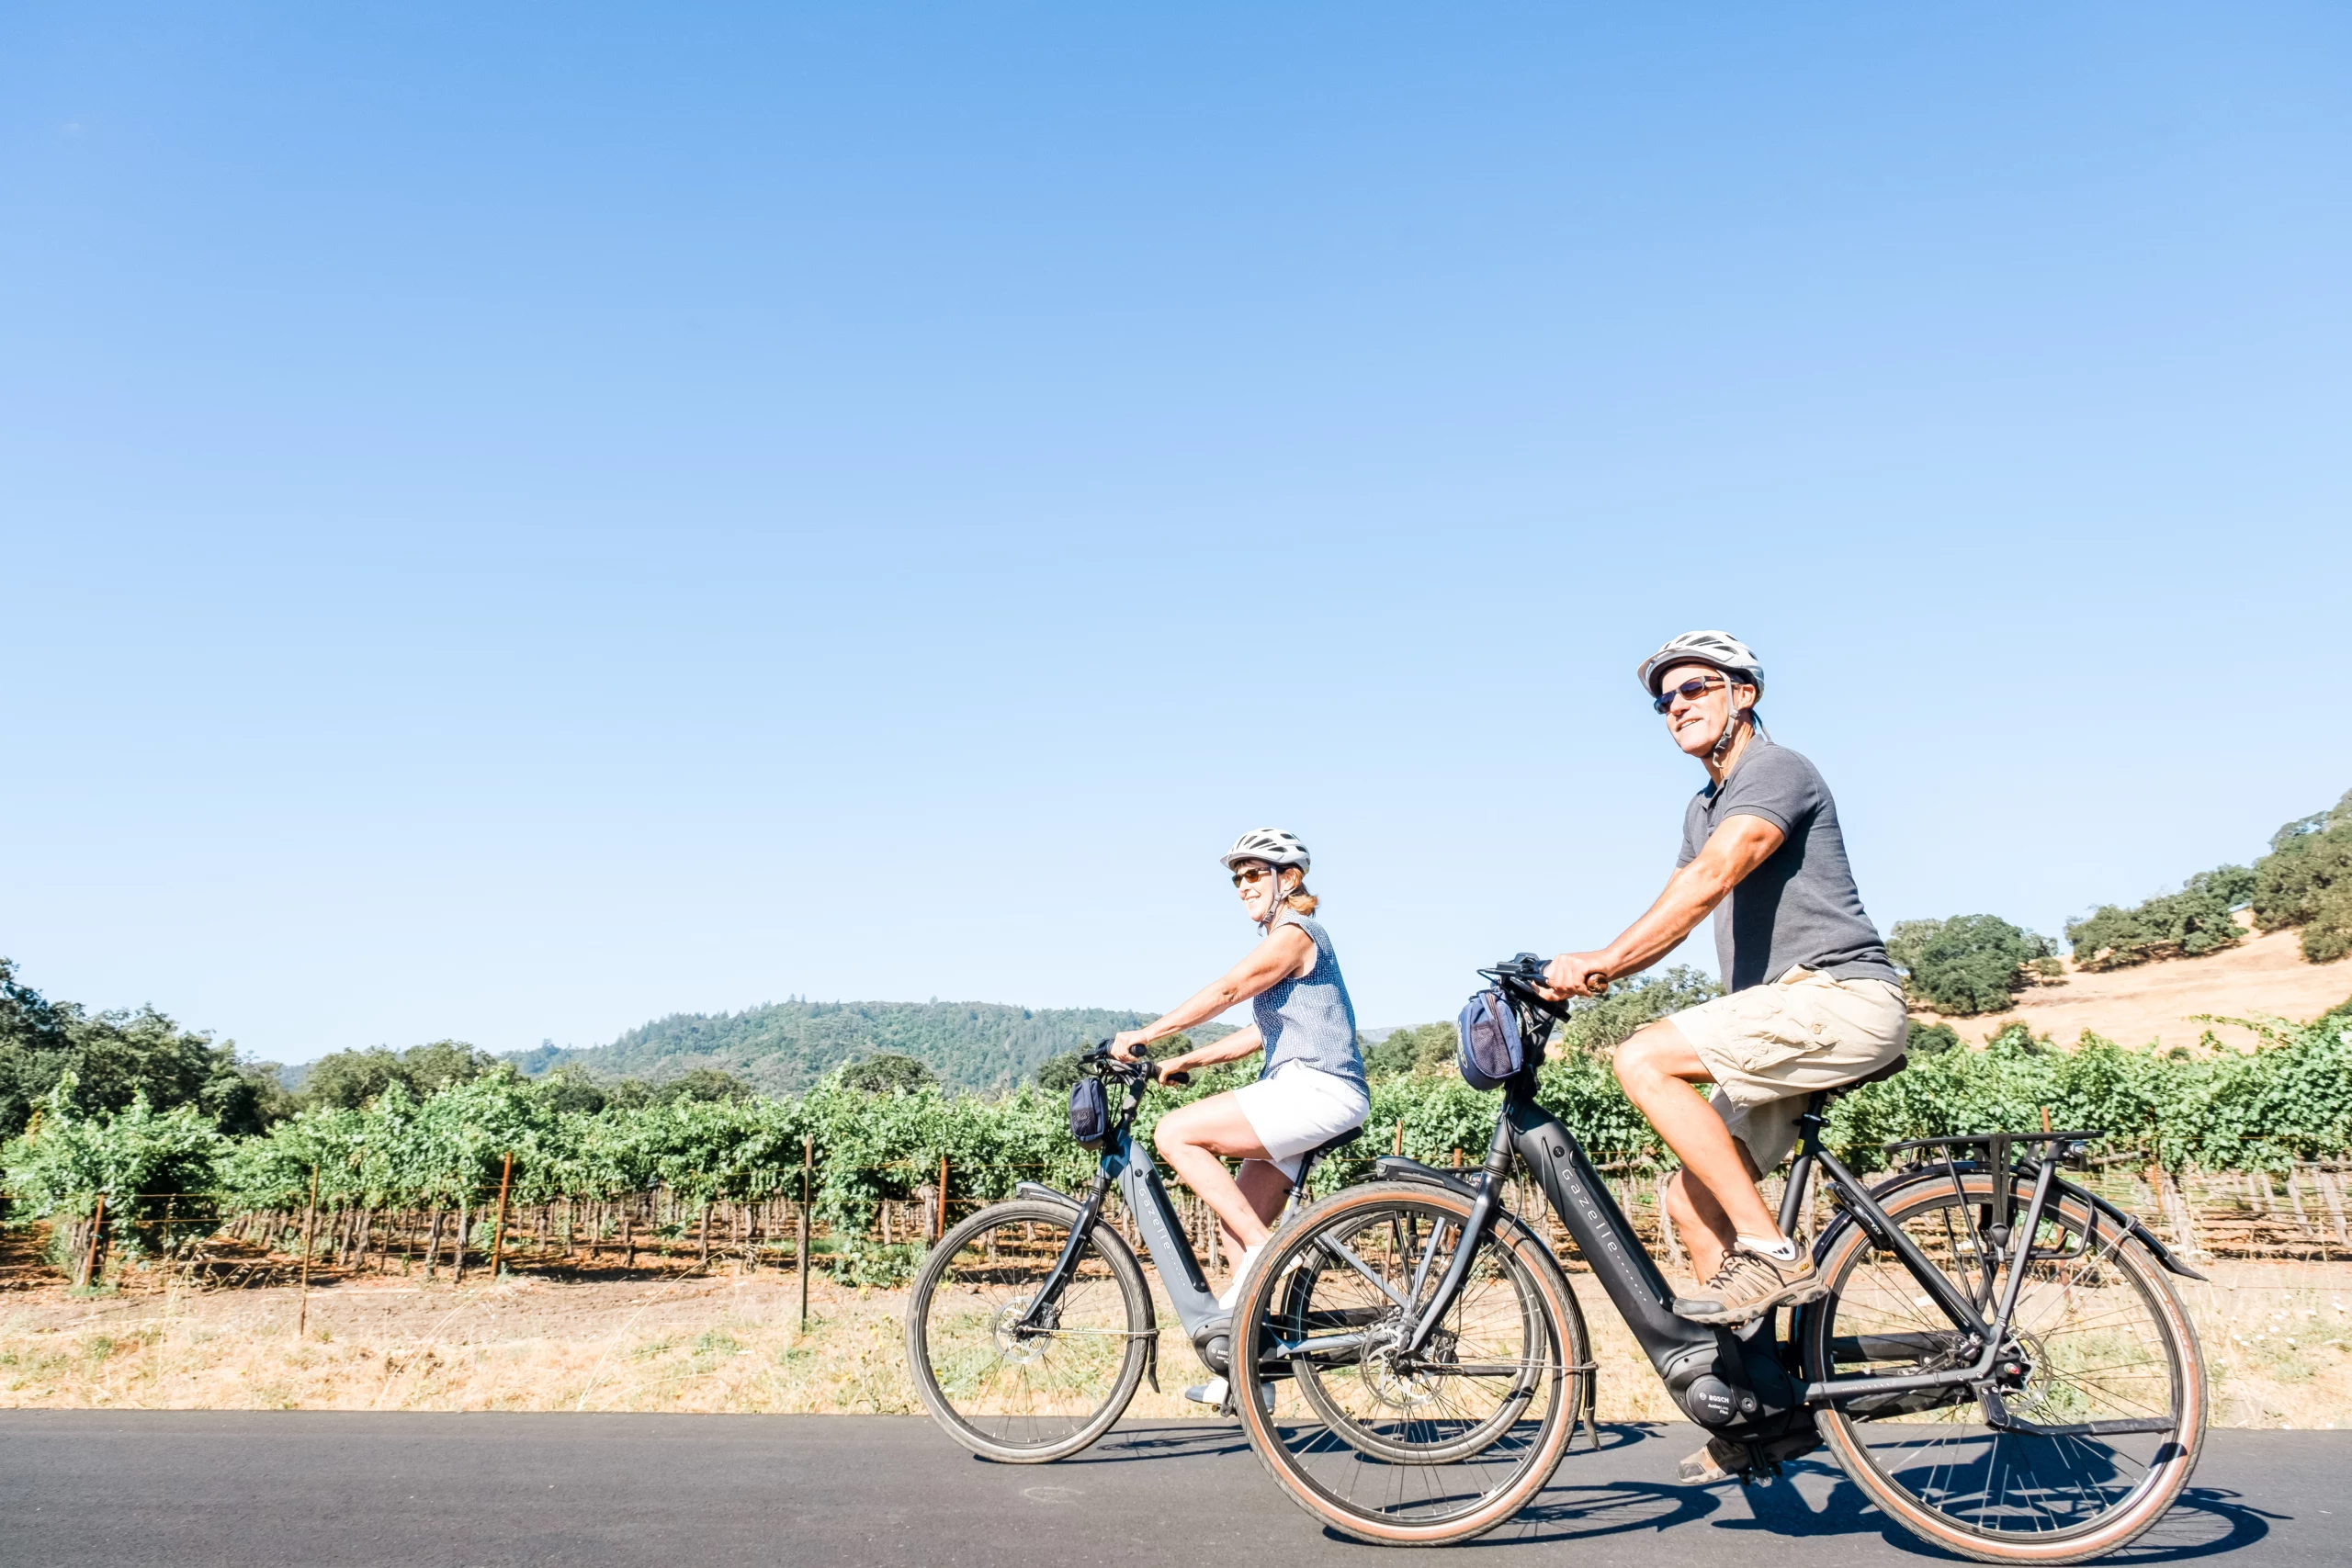 A couple rides electric bikes along a road bordered by vineyards.